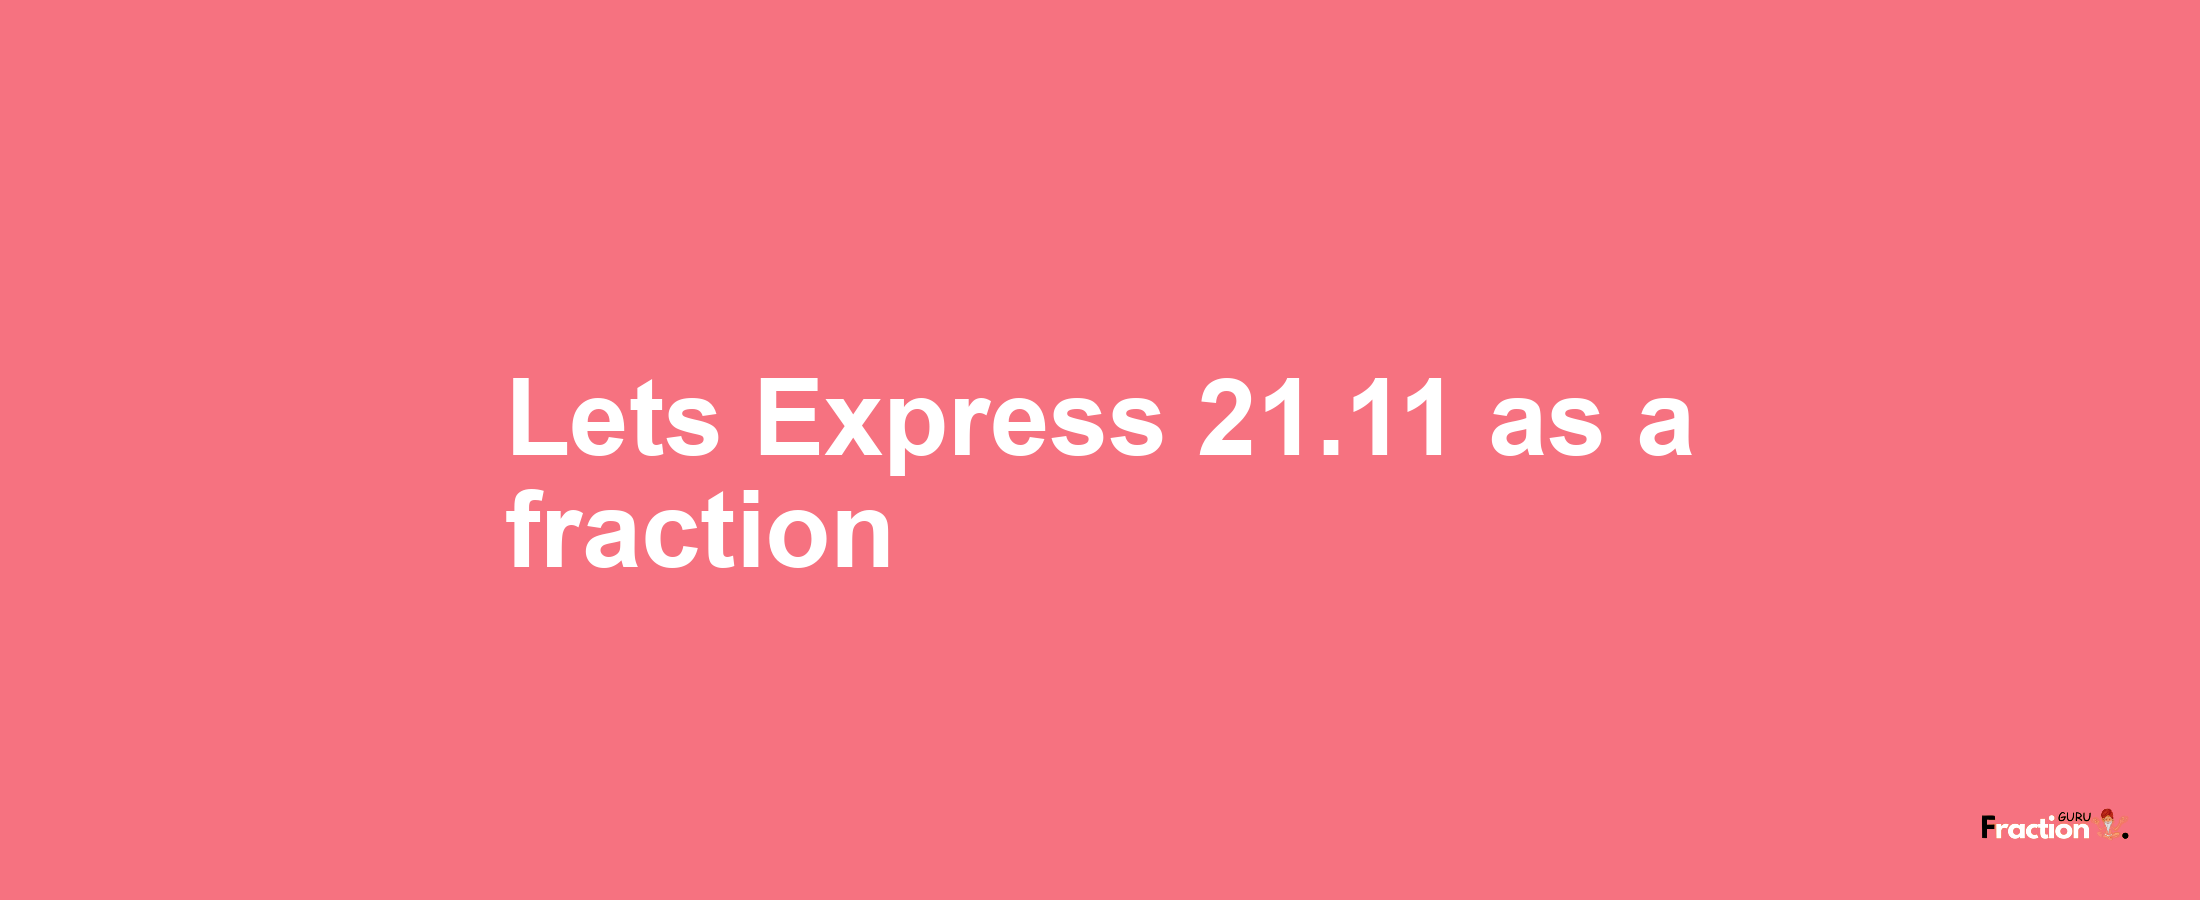 Lets Express 21.11 as afraction